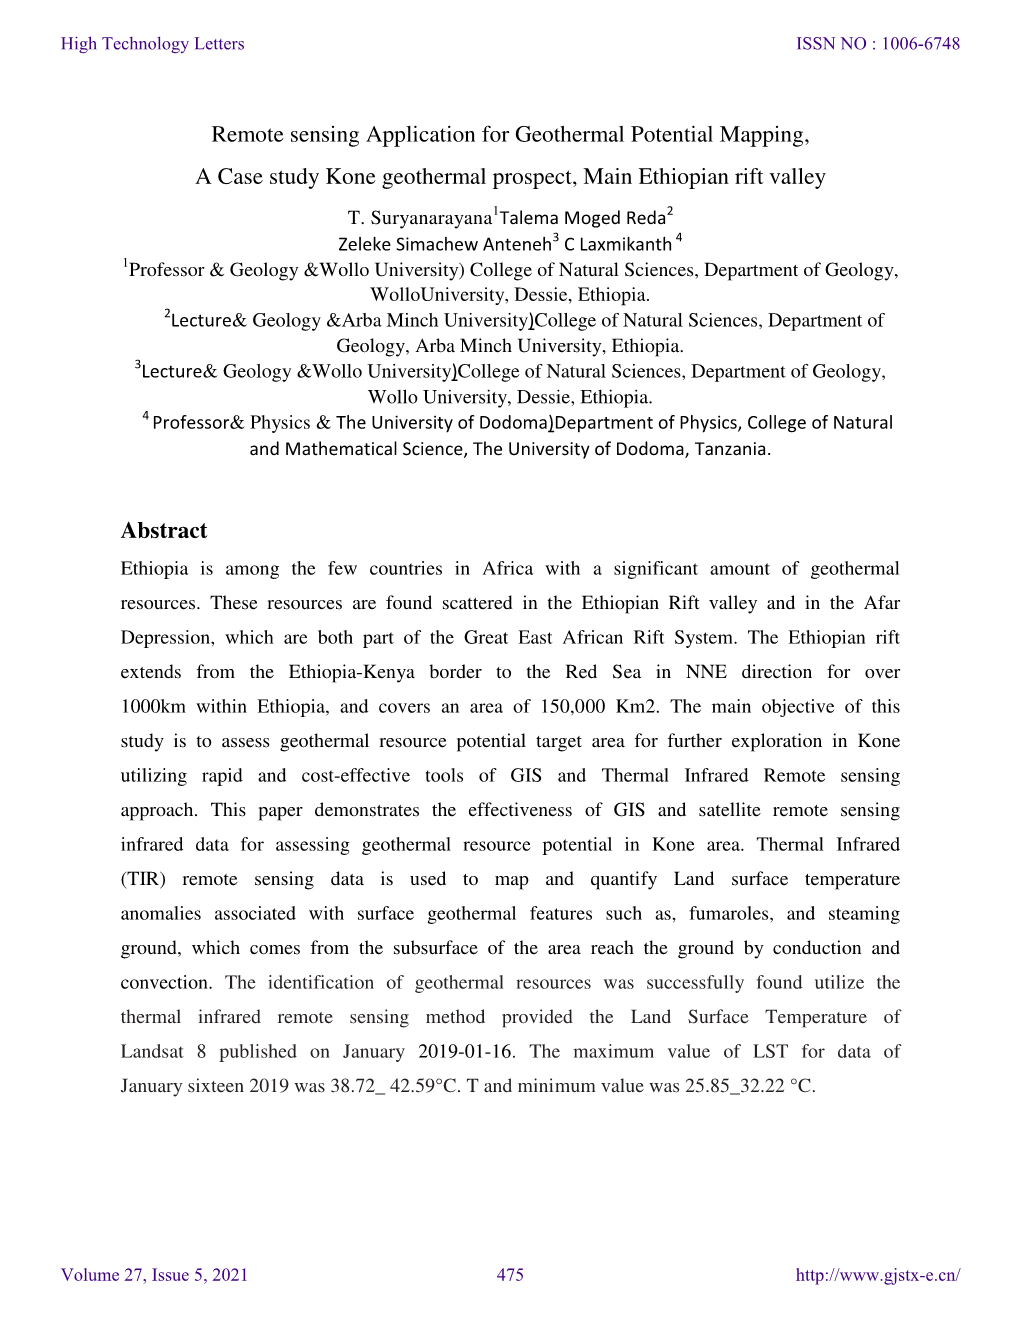 Remote Sensing Application for Geothermal Potential Mapping, a Case Study Kone Geothermal Prospect, Main Ethiopian Rift Valley T